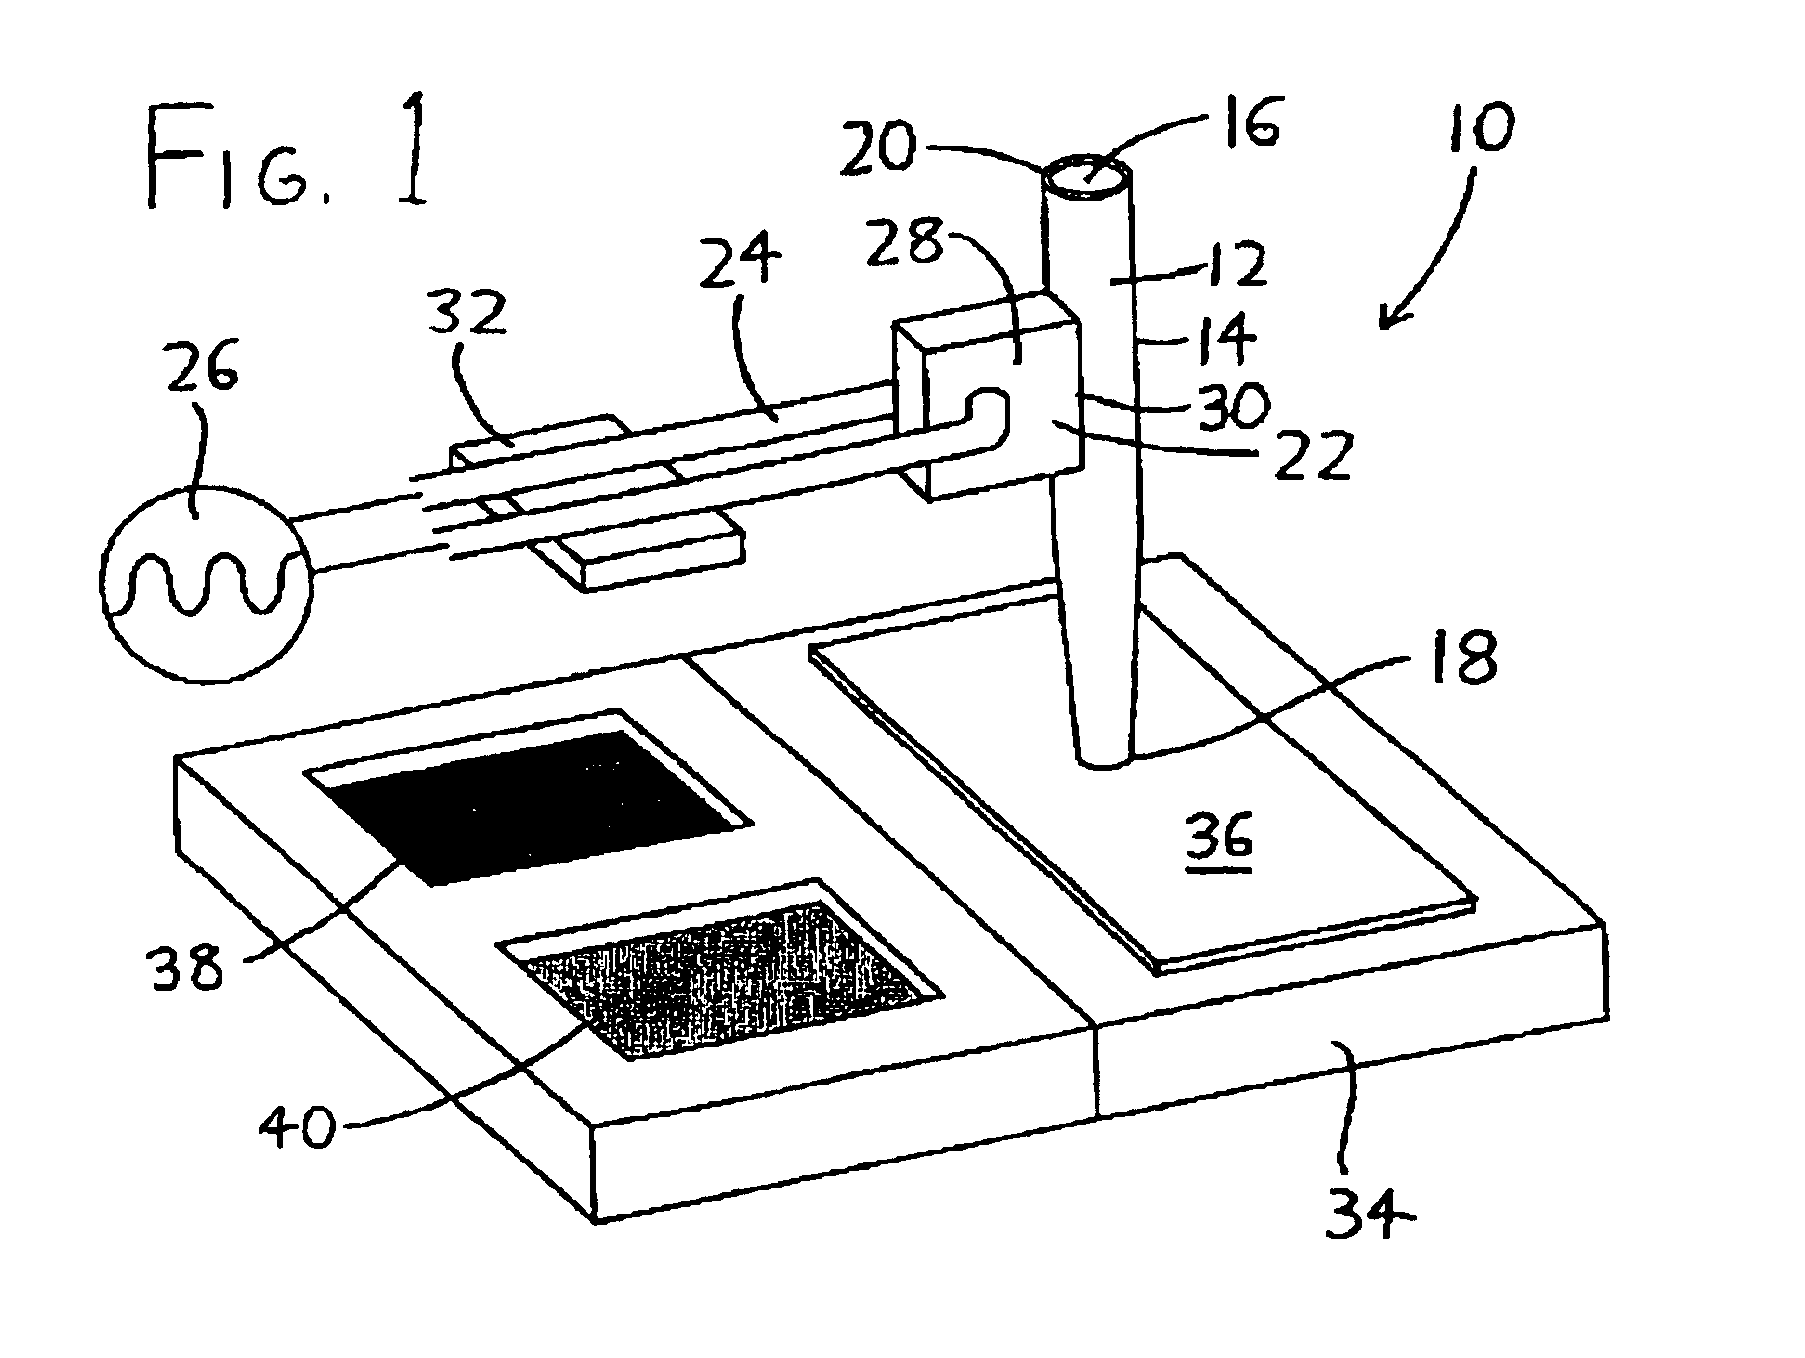 Methods and apparata for precisely dispensing microvolumes of fluids